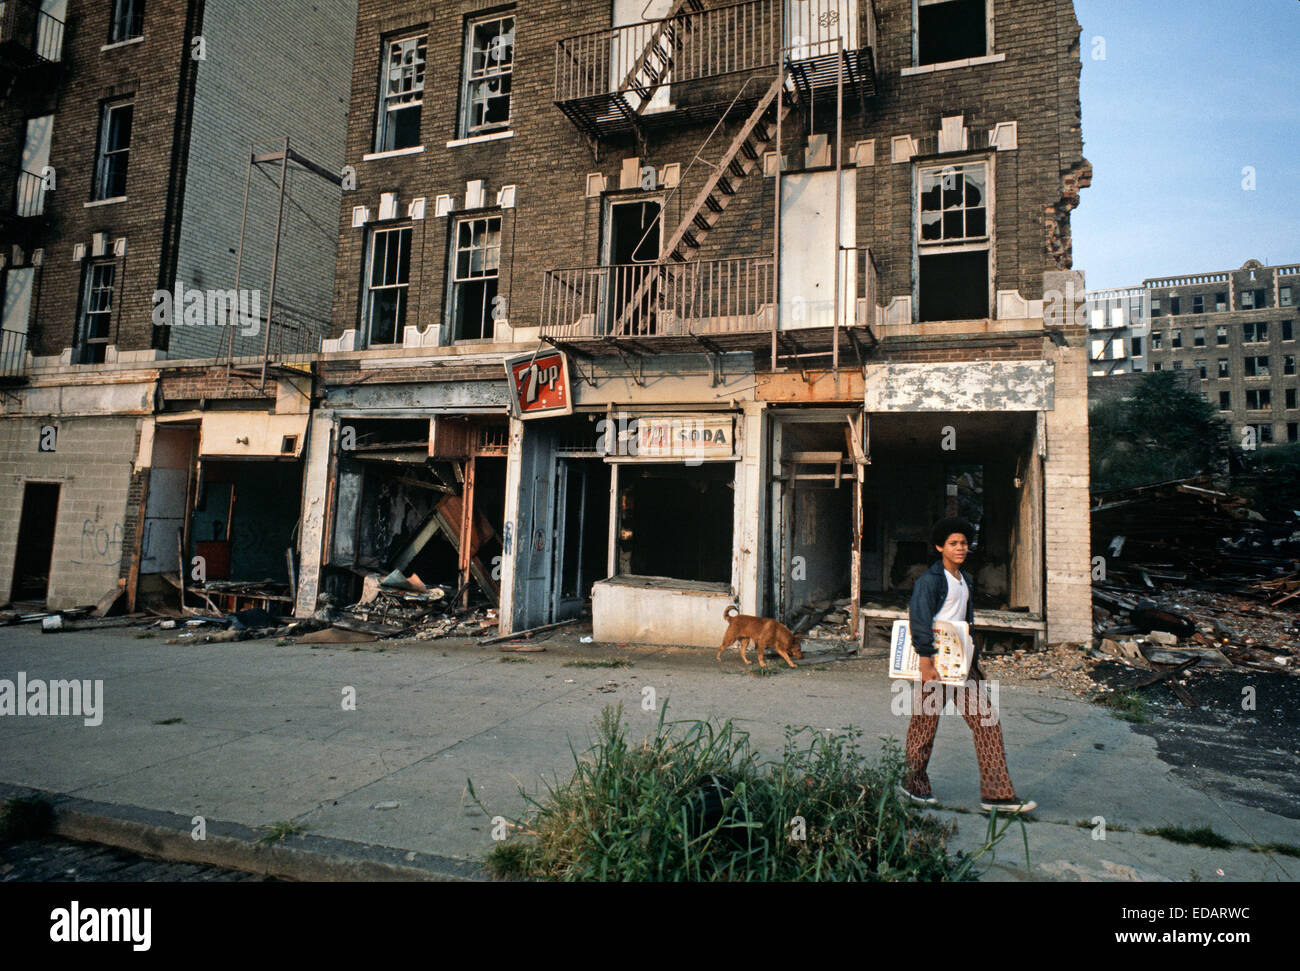 USA, SOUTH BRONX, NEW YORK CITY - AUGUST 1977. Abandoned burnt-out tenement blocks and shops,  South Bronx, New York City, USA. Stock Photo